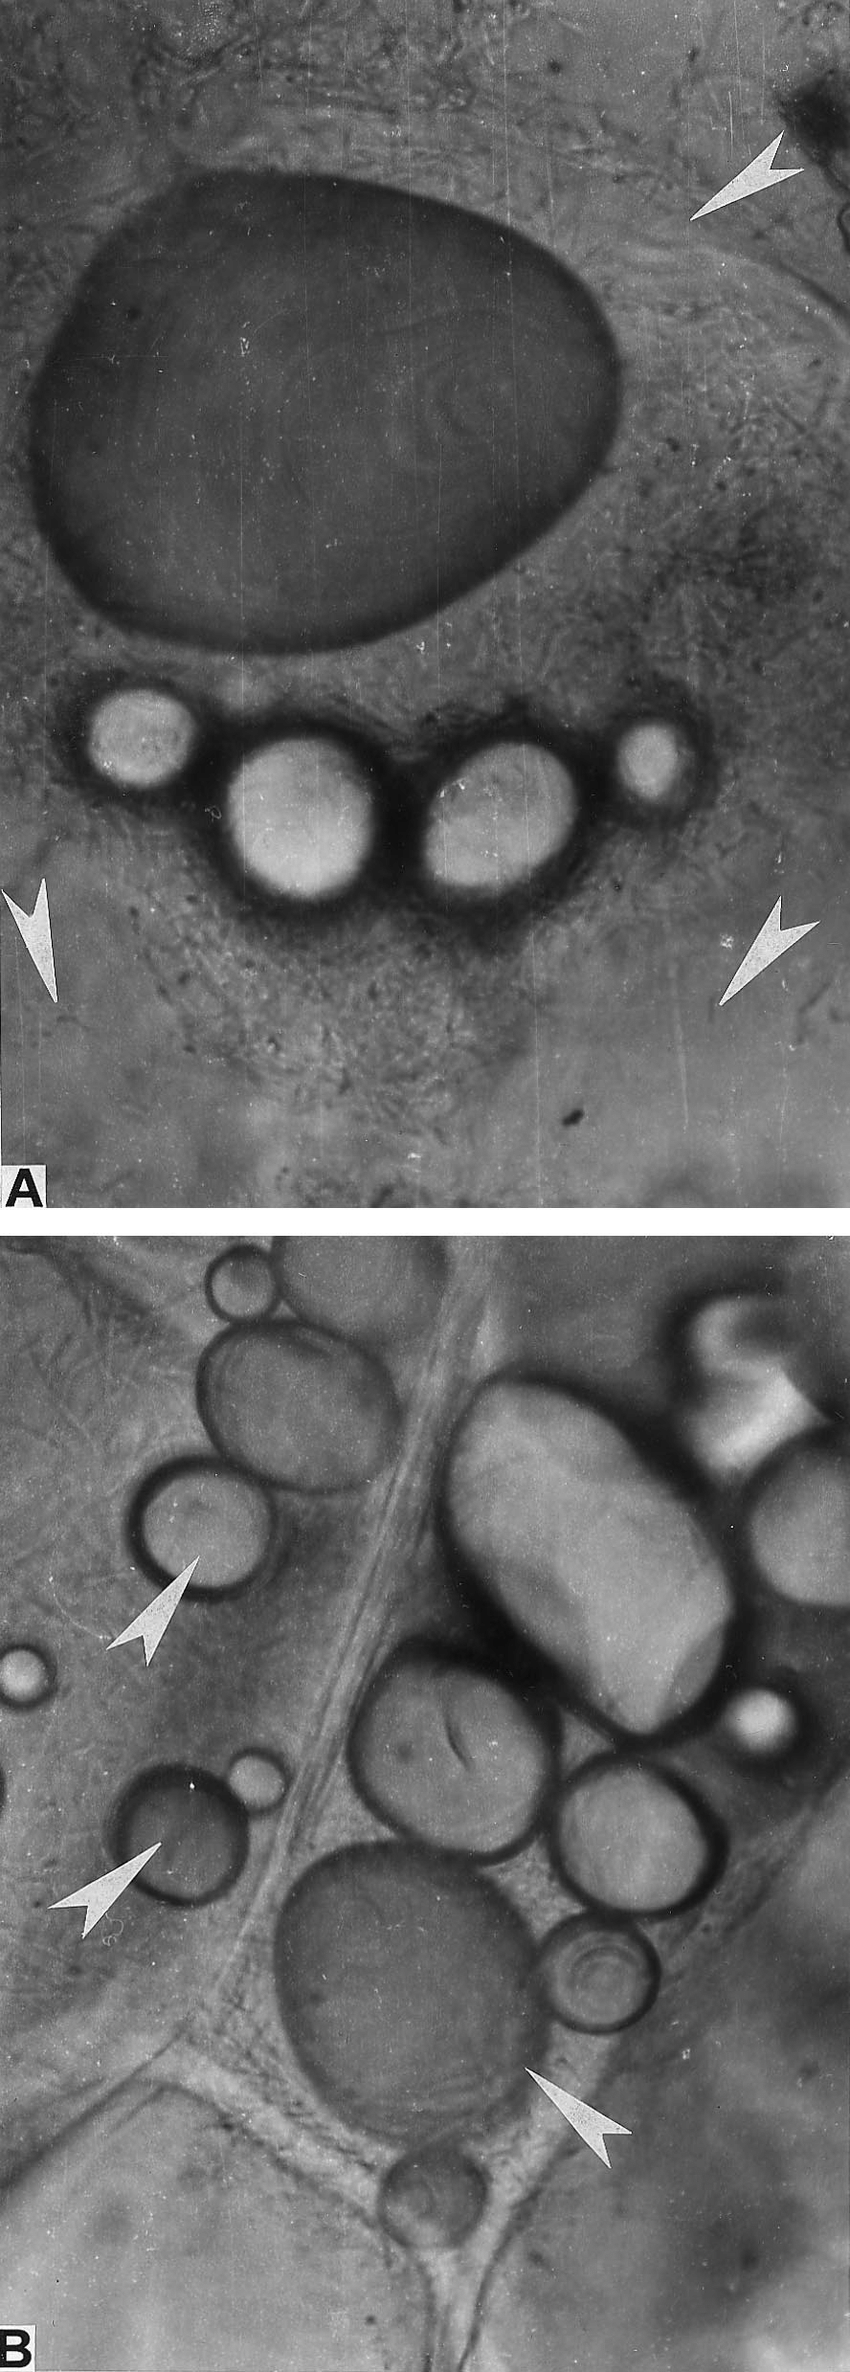 Erwinia carotovora-potato cell interaction. (A) Tissue maceration and cell collapse caused by Erwinia carotovora subsp. carotovora 8982 inoculated at 10 8 cfu/mL. (B) A potato tuber slice treated with concentrated filtrate of a 4-day-old culture of Bacillus subtilis BS 107 prior to inoculation. Arrows indicate the cell wall remnants, neighbouring cells, and groups of starch grains. Magnification, 400×. 